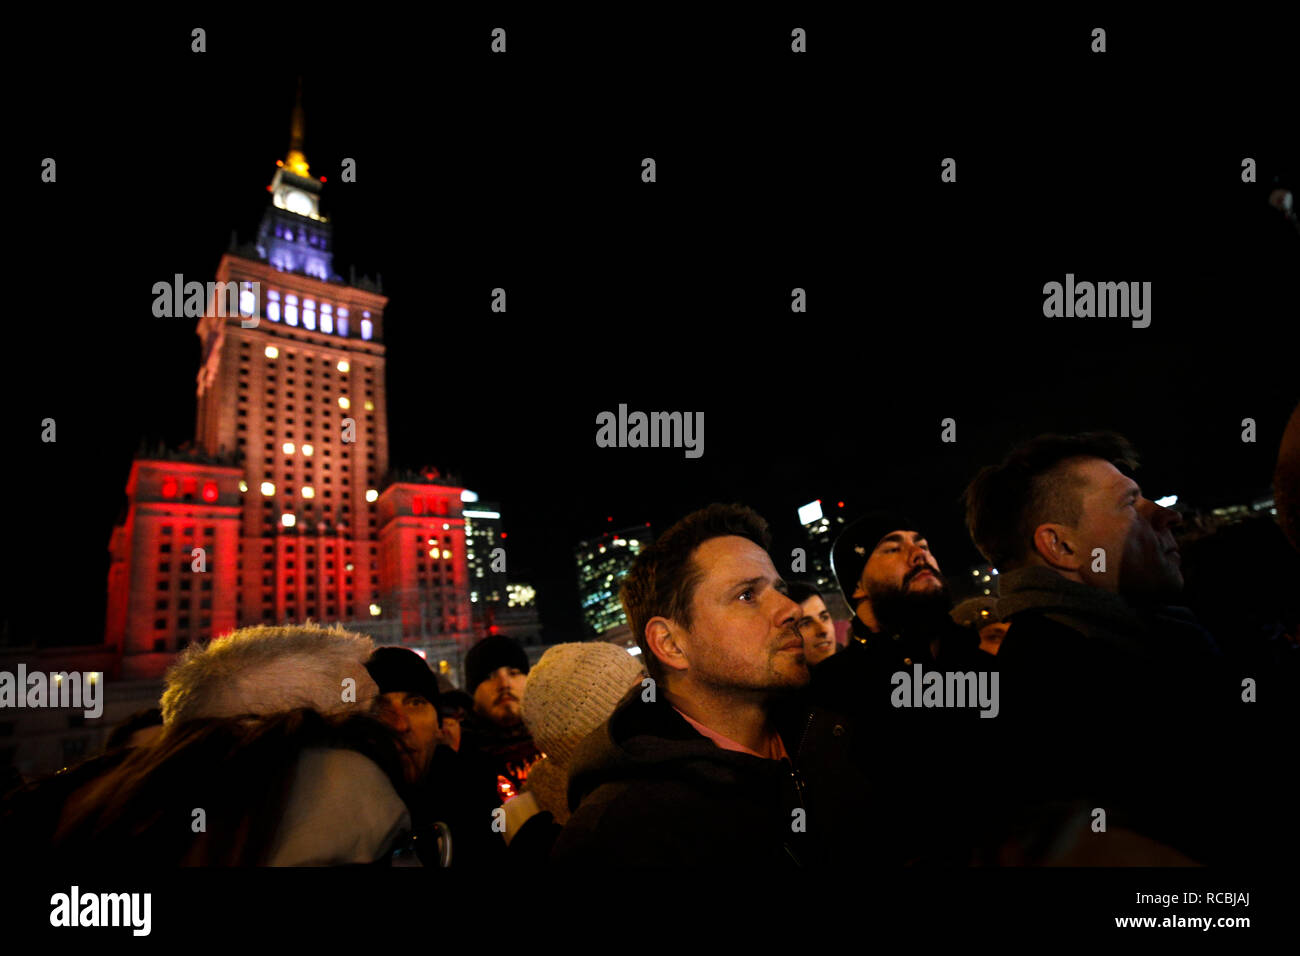 (190115) -- WARSAW, Jan. 15, 2019 (Xinhua) -- Mayor of Warsaw Rafal Trzaskowski (C) joins in a march in commemoration of Pawel Adamowicz, the late Mayor of the Polish port city of Gdansk, in center of Warsaw, Poland, Jan. 14, 2018. The UN refugee agency, UNHCR, said Monday it is 'deeply shocked and saddened' to hear that Pawel Adamowicz has died after being stabbed at a charity event. Adamowicz launched the Gdansk 'Immigrant Integration Model' in 2016, a model that has inspired other Polish cities, said the UN agency. The agency wrote in February 2018 that the Gdansk Model is a com Stock Photo